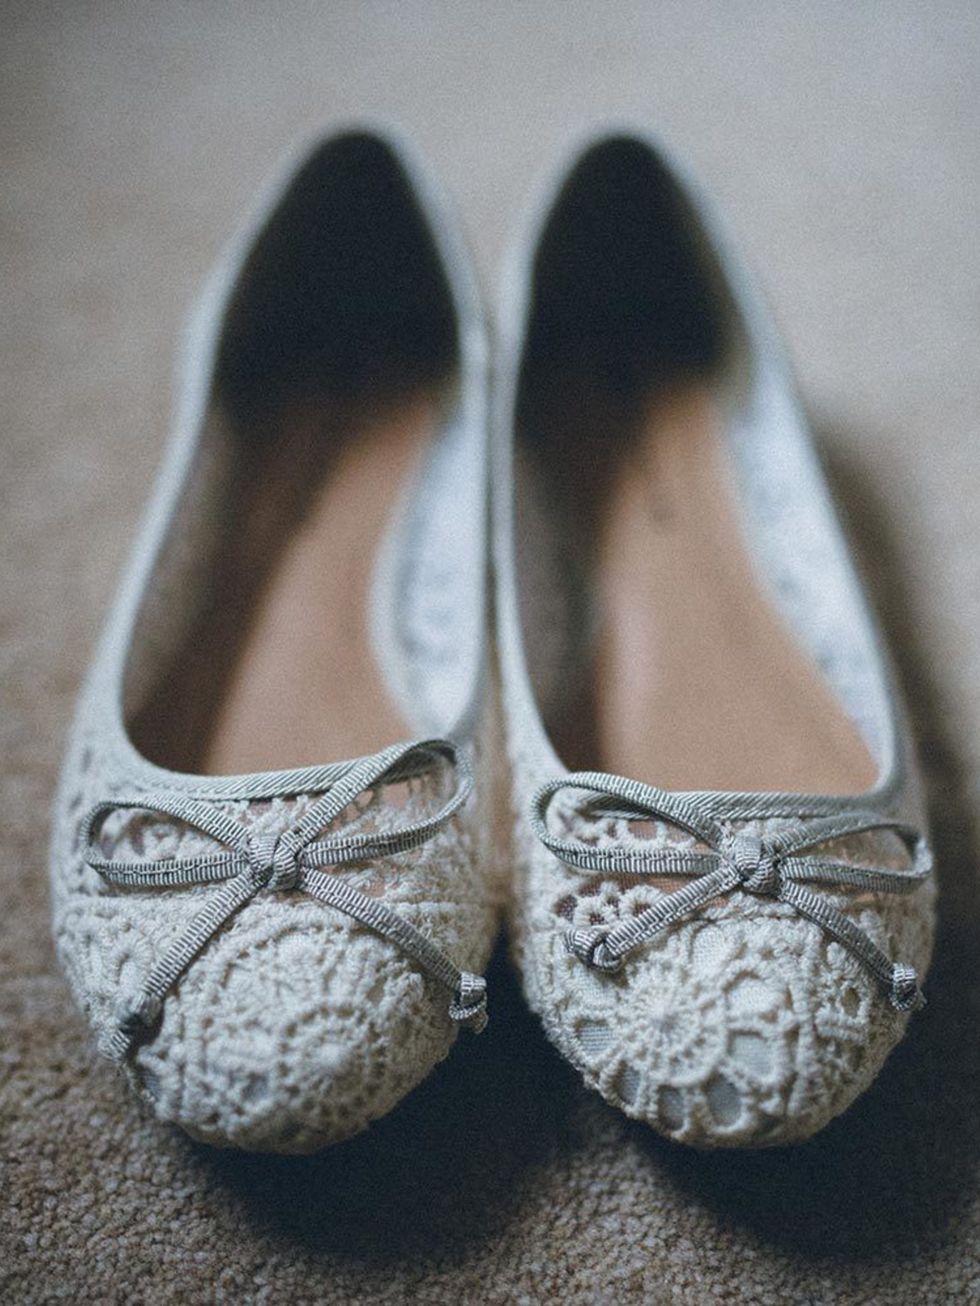 <p>My wedding shoes weren't really a priority for me. I'm only a tiny bit shorter than Phil and had no desire to be towering over him on the day.</p>

<p>I found these cream pumps just in time, and ordered them online from <a href="http://www.marksandspen